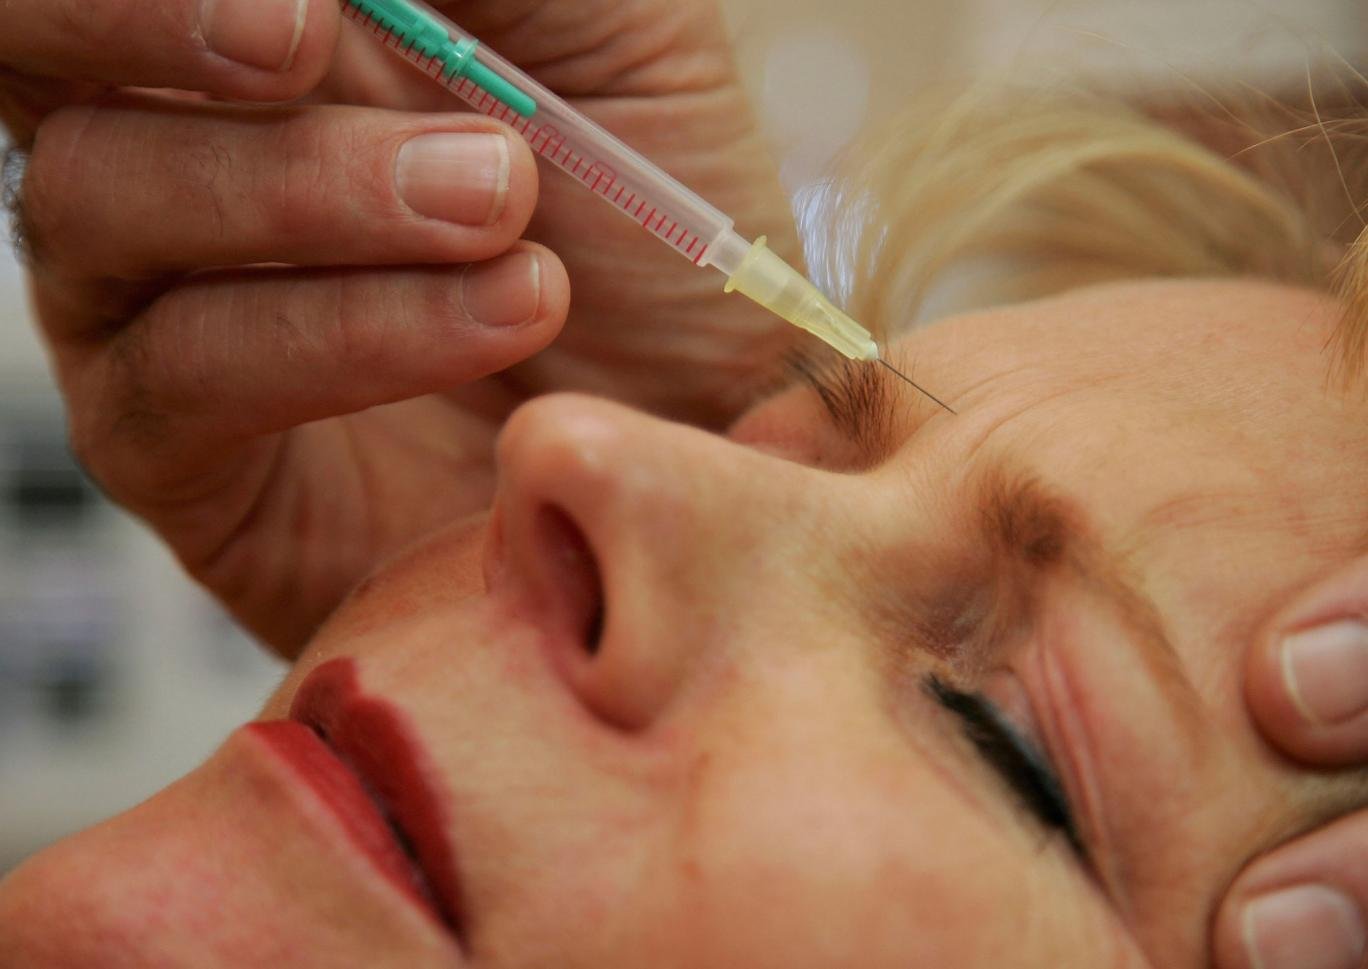 Botox and ketamine could help treat depression, study finds